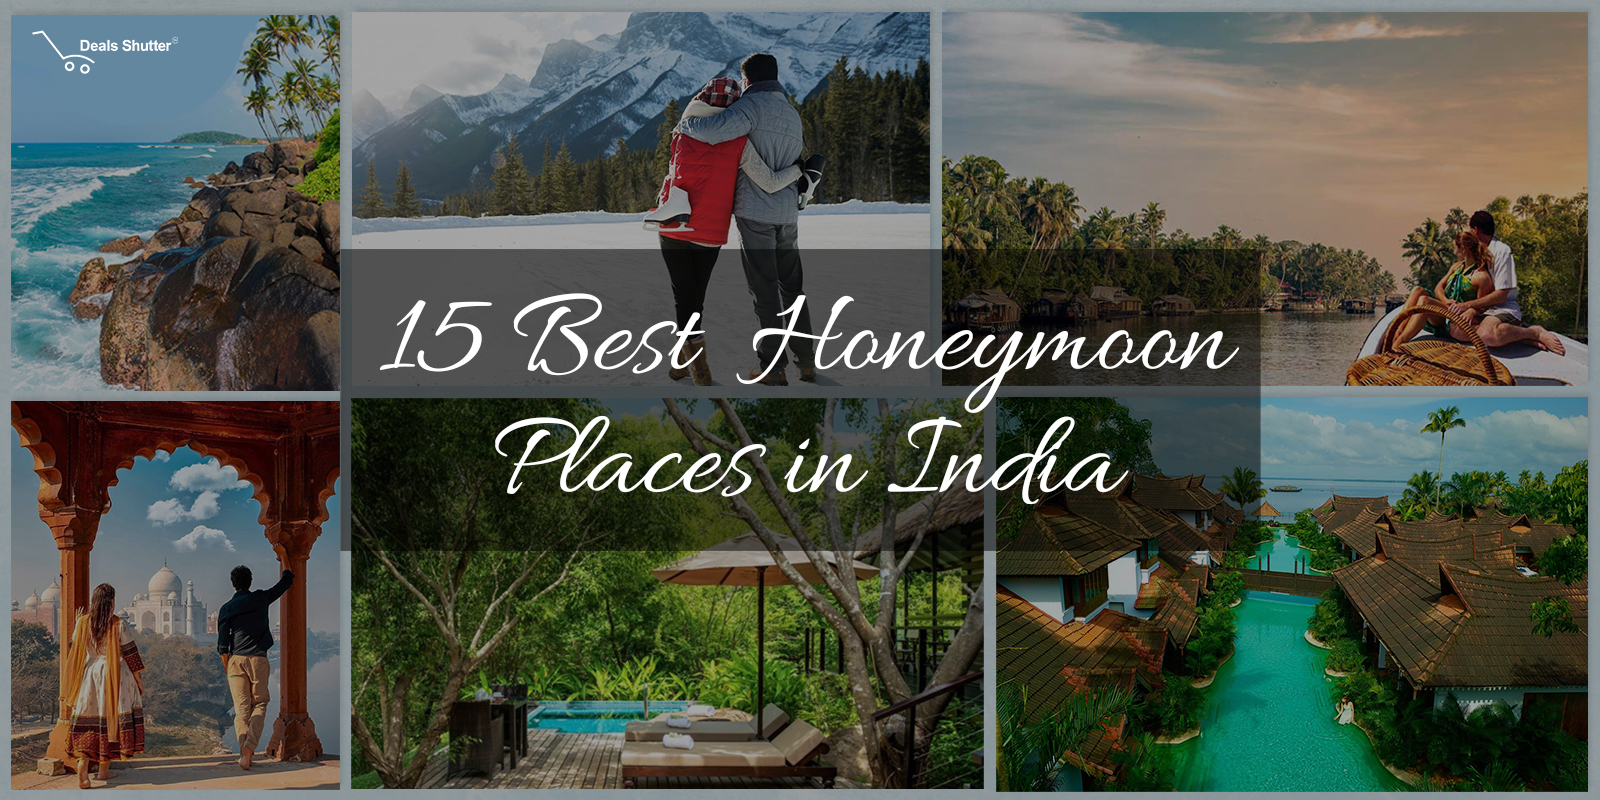 honeymoon trip in india places